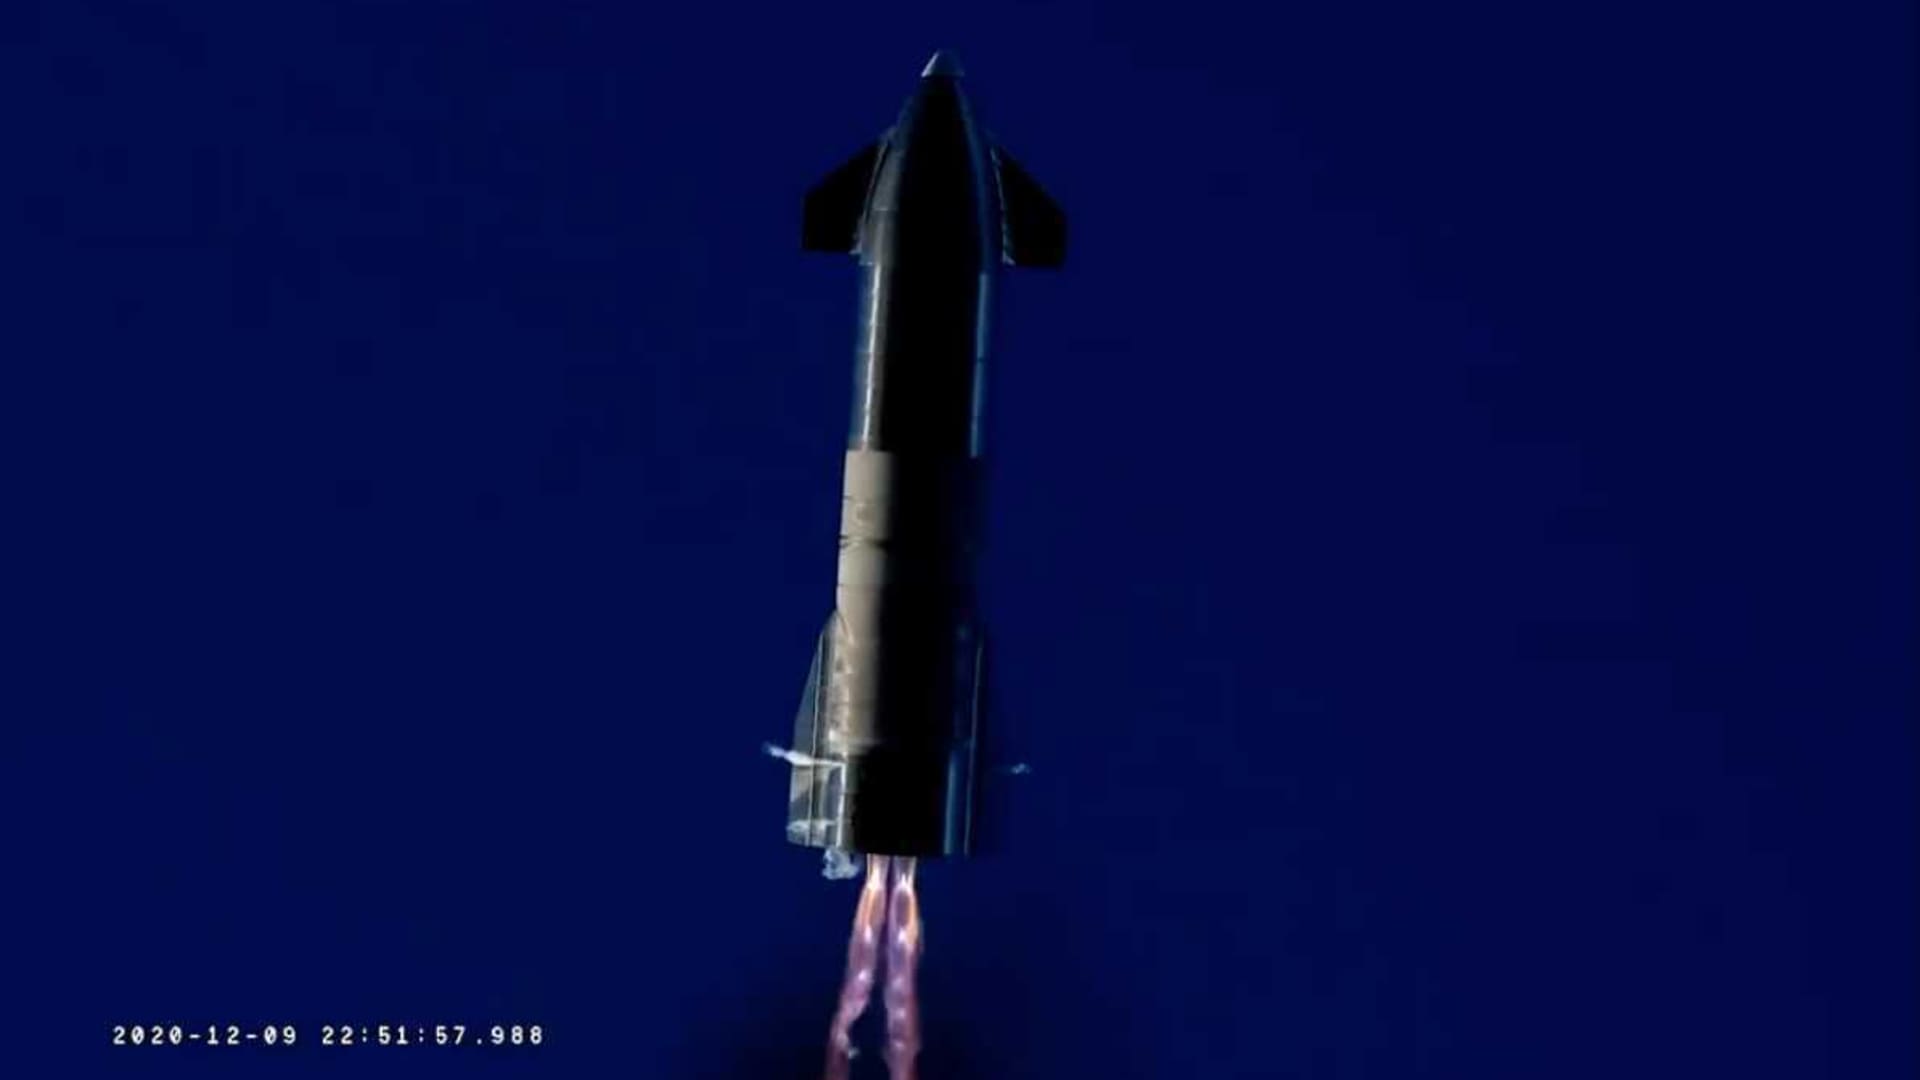 Starship prototype rocket SN8 fires two Raptor engines as it attempts to land after its high-altitude test flight on Dec. 9, 2020.